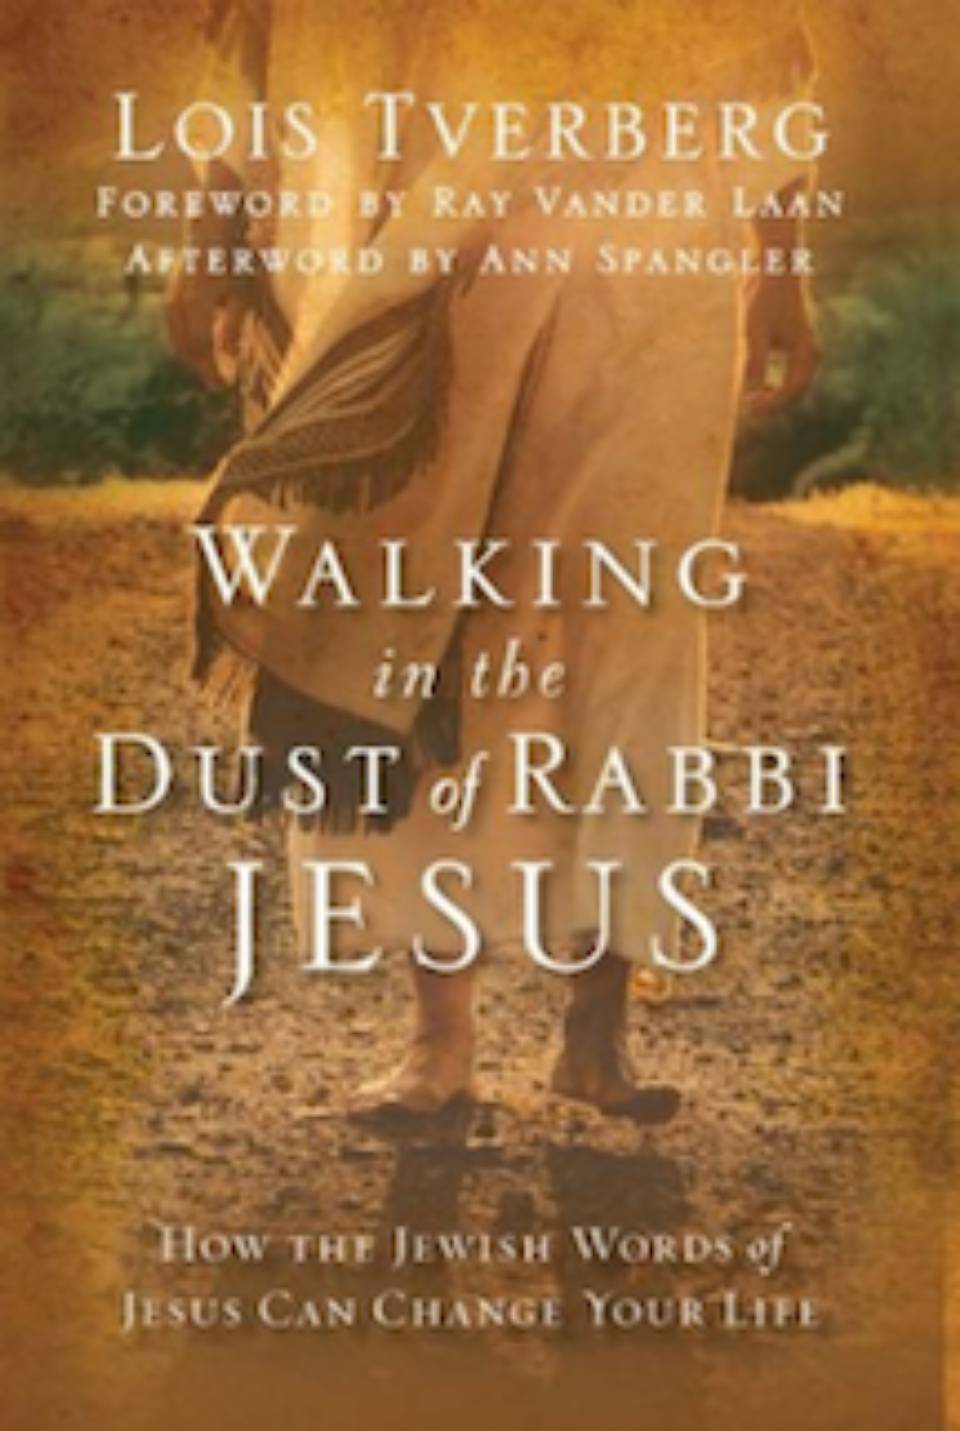 Congrast to Sarah S. and Margaret V. who each won a copy of Walking in the Dust of Rabbi Jesus by Lois Tverberg.